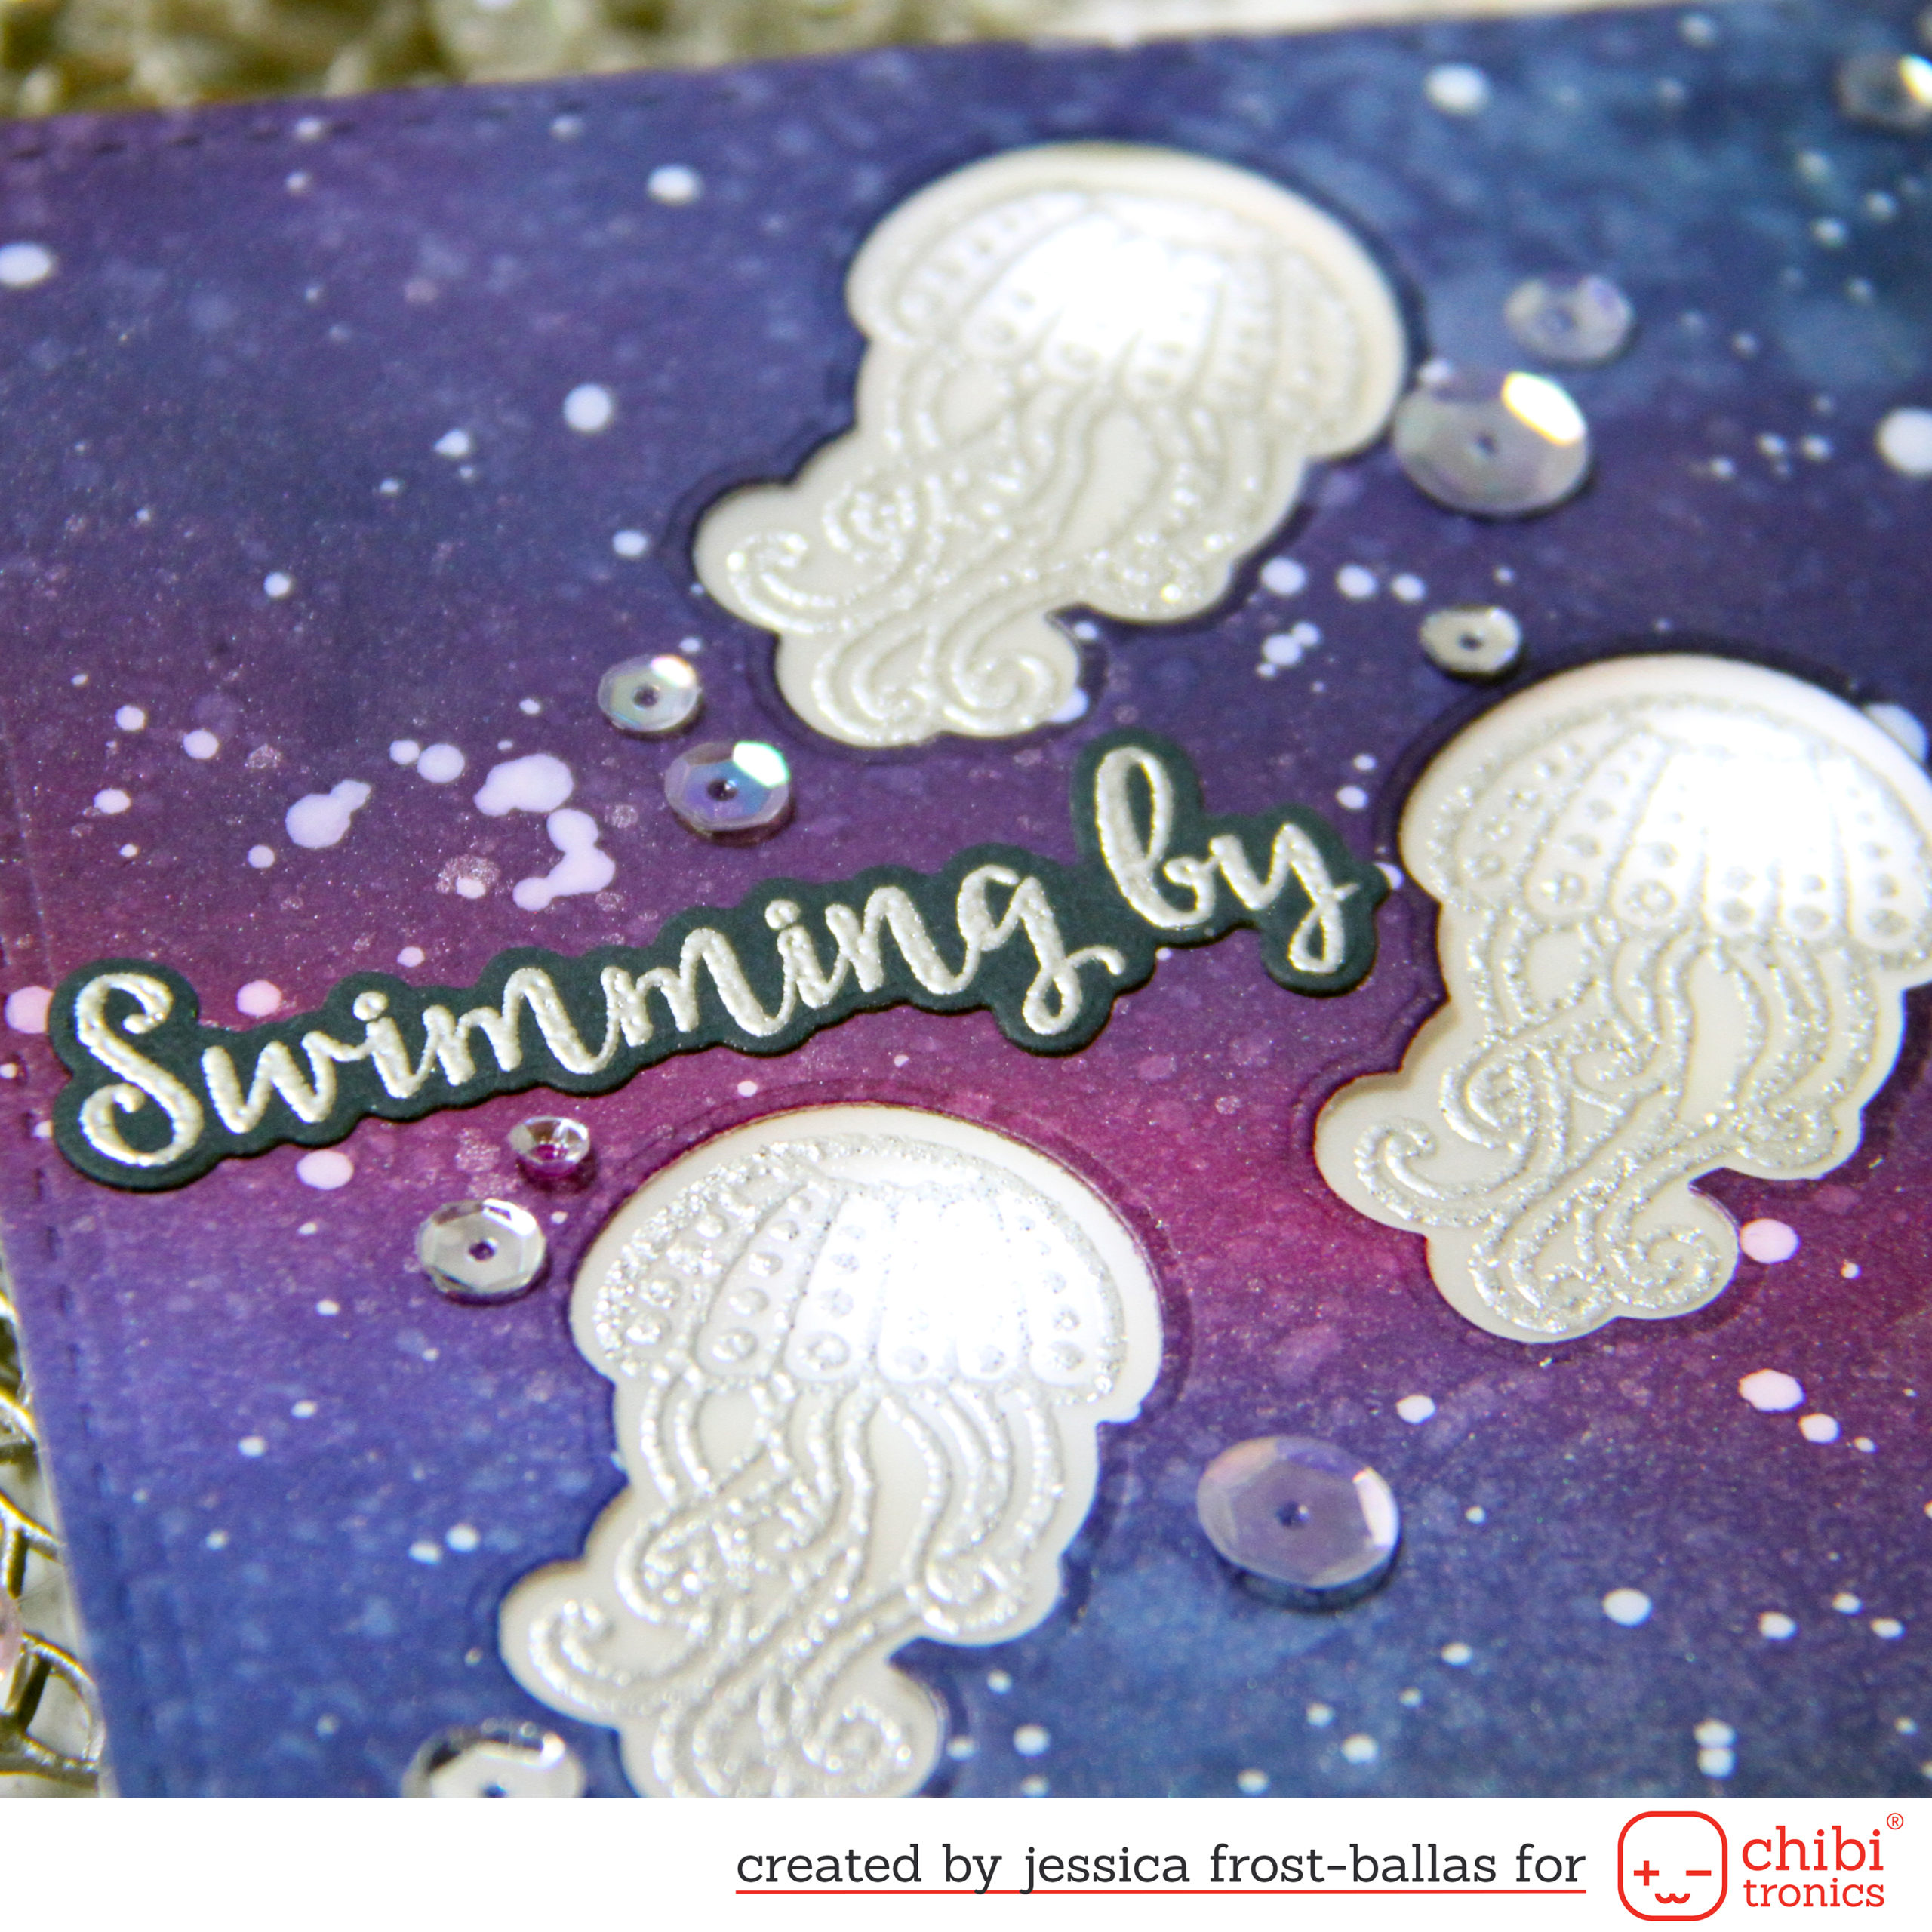 World CardMaking Day Blog Hop with Honeybee Stamps